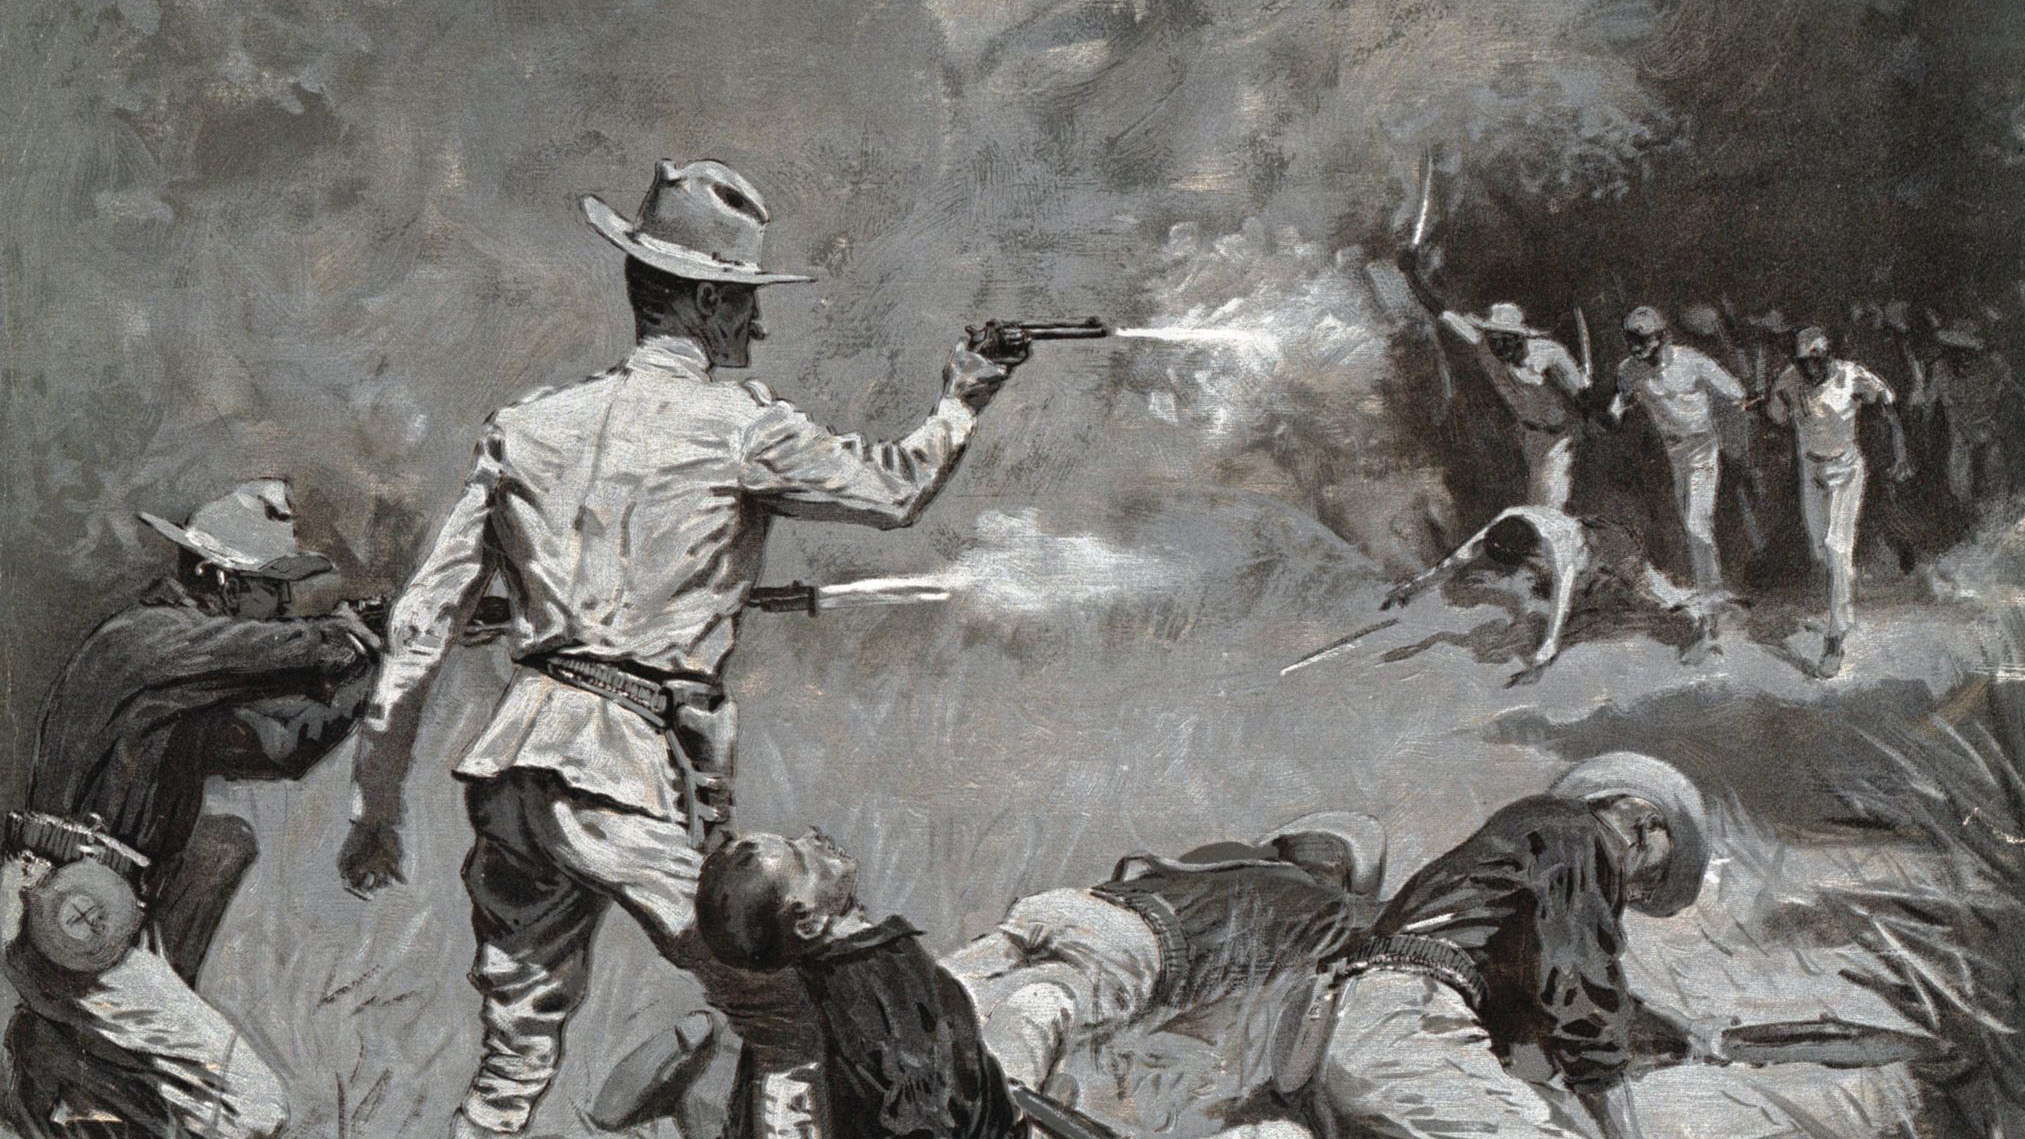 An American Army officer fires his Colt 1892 revolver at charging Filipino insurgents in this painting by Frederick Remington.